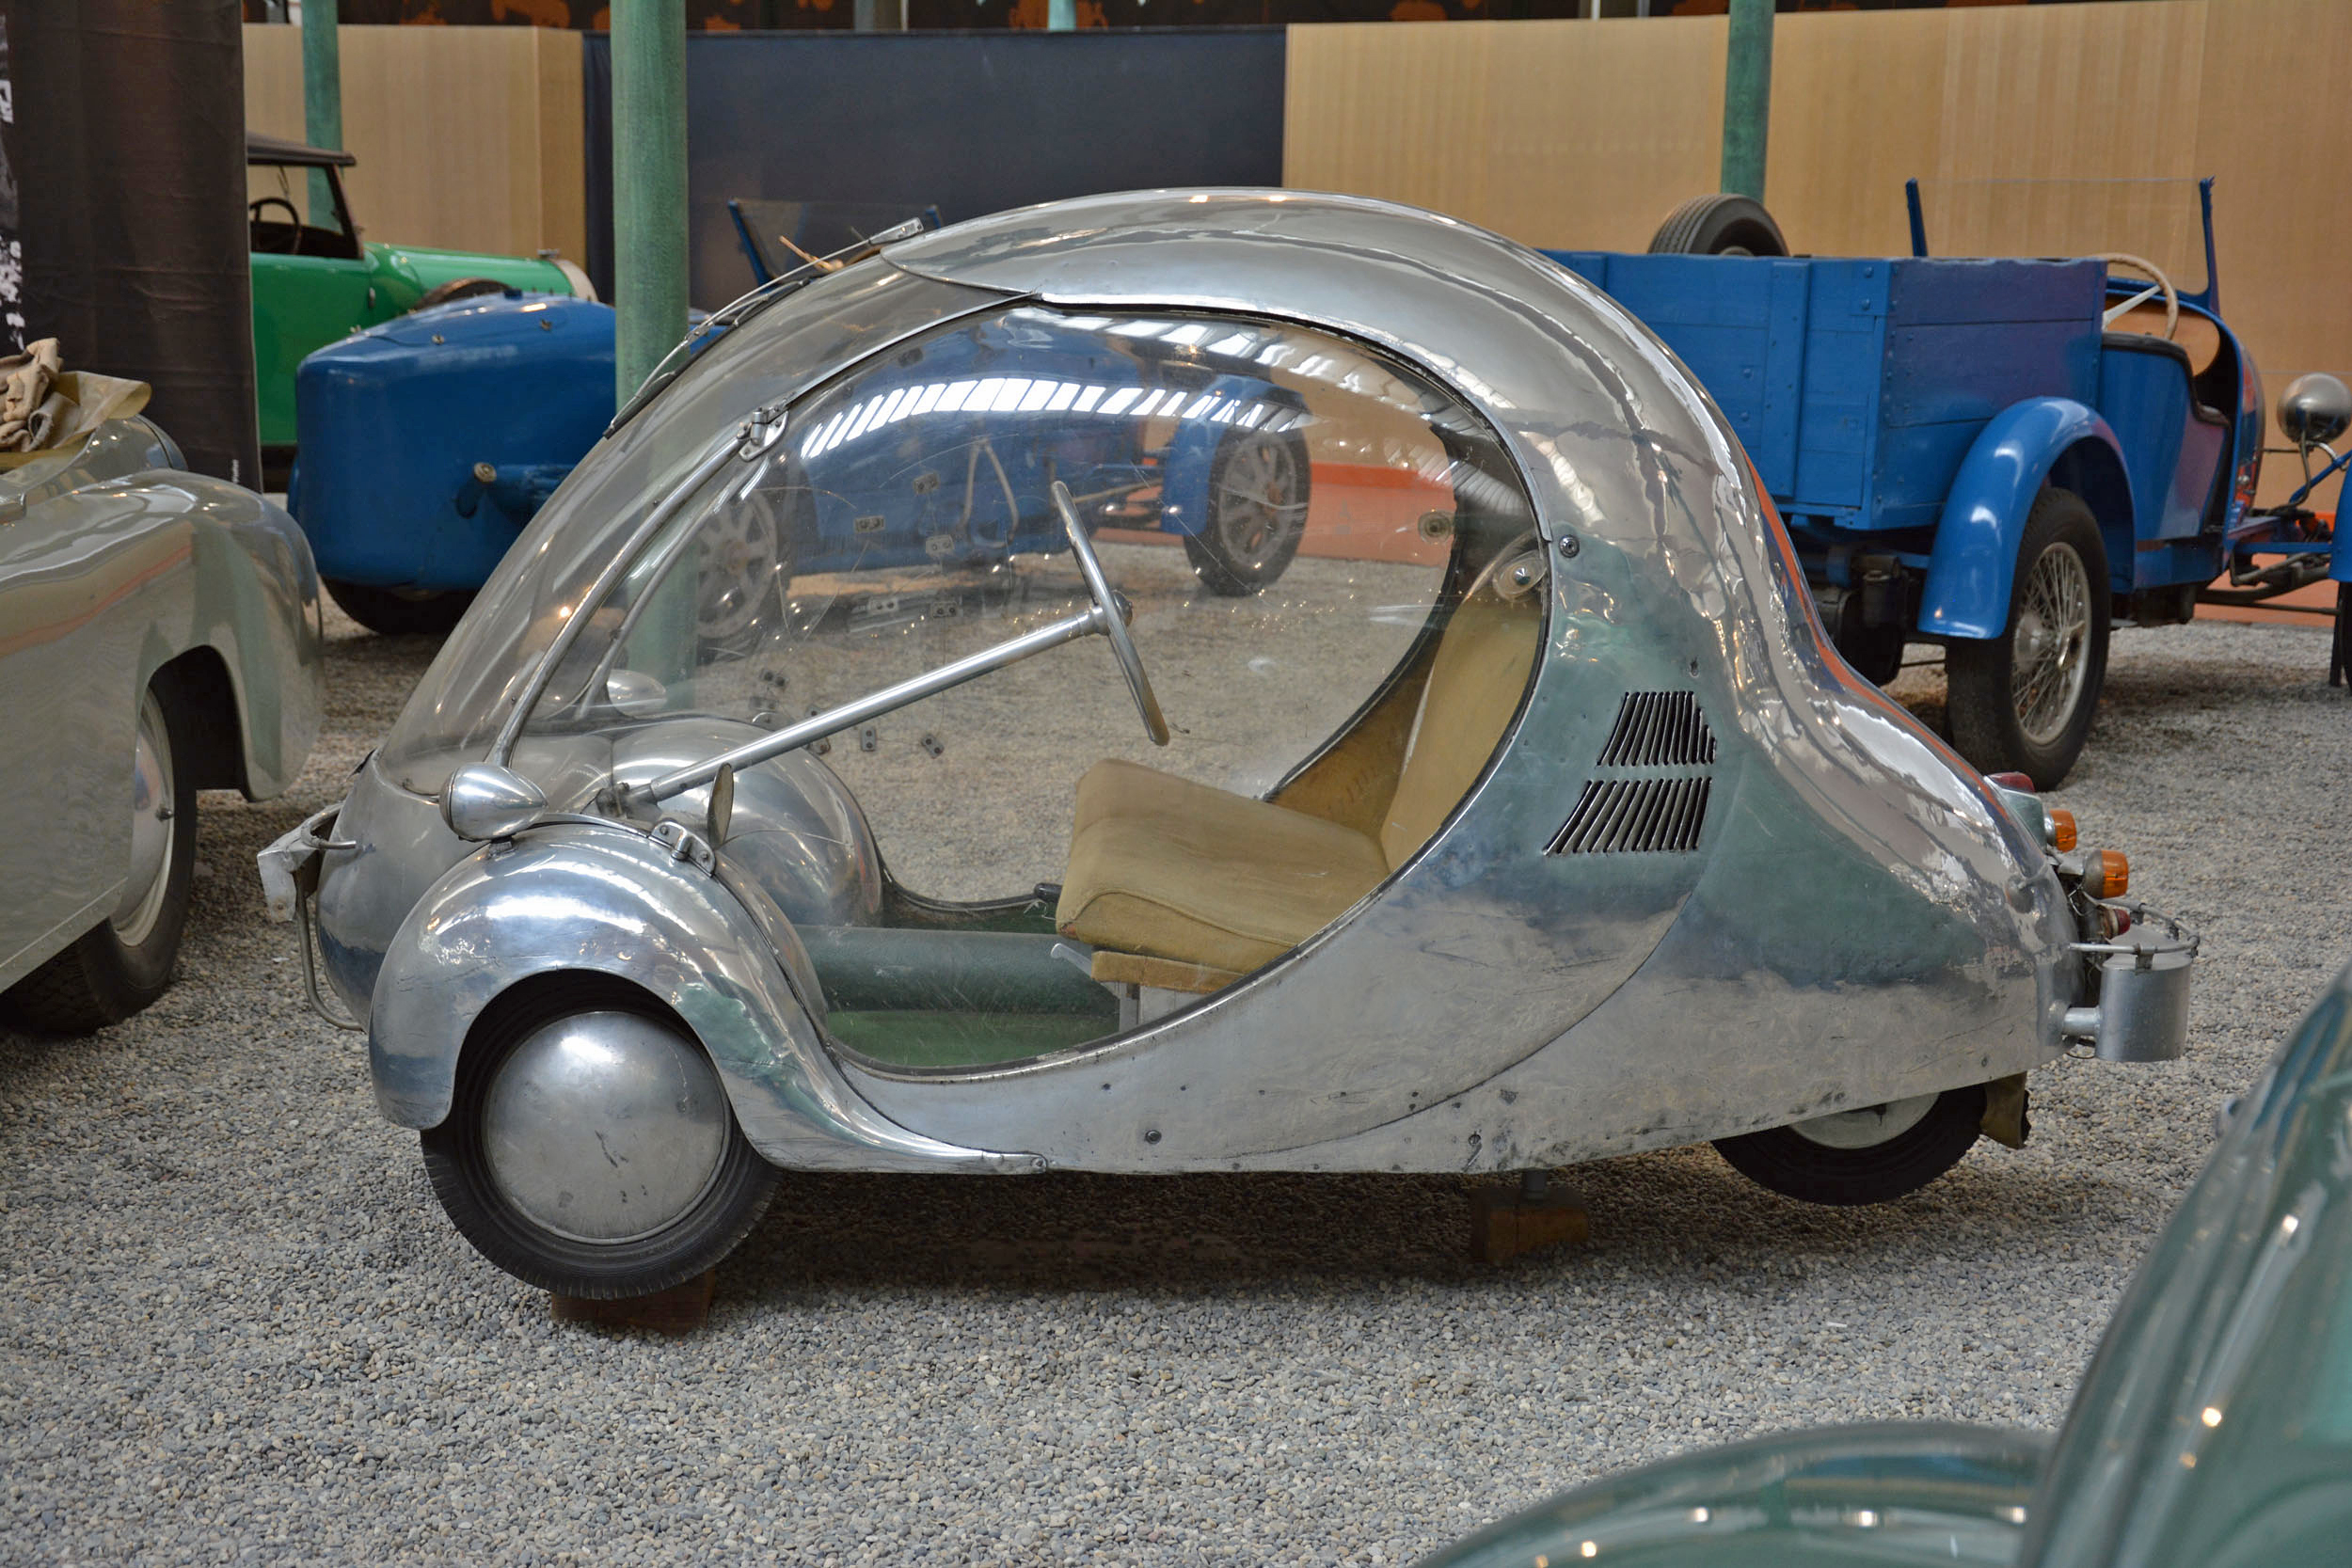 The Electric Egg was a runny attempt to cope with WWII’s fuel crisis